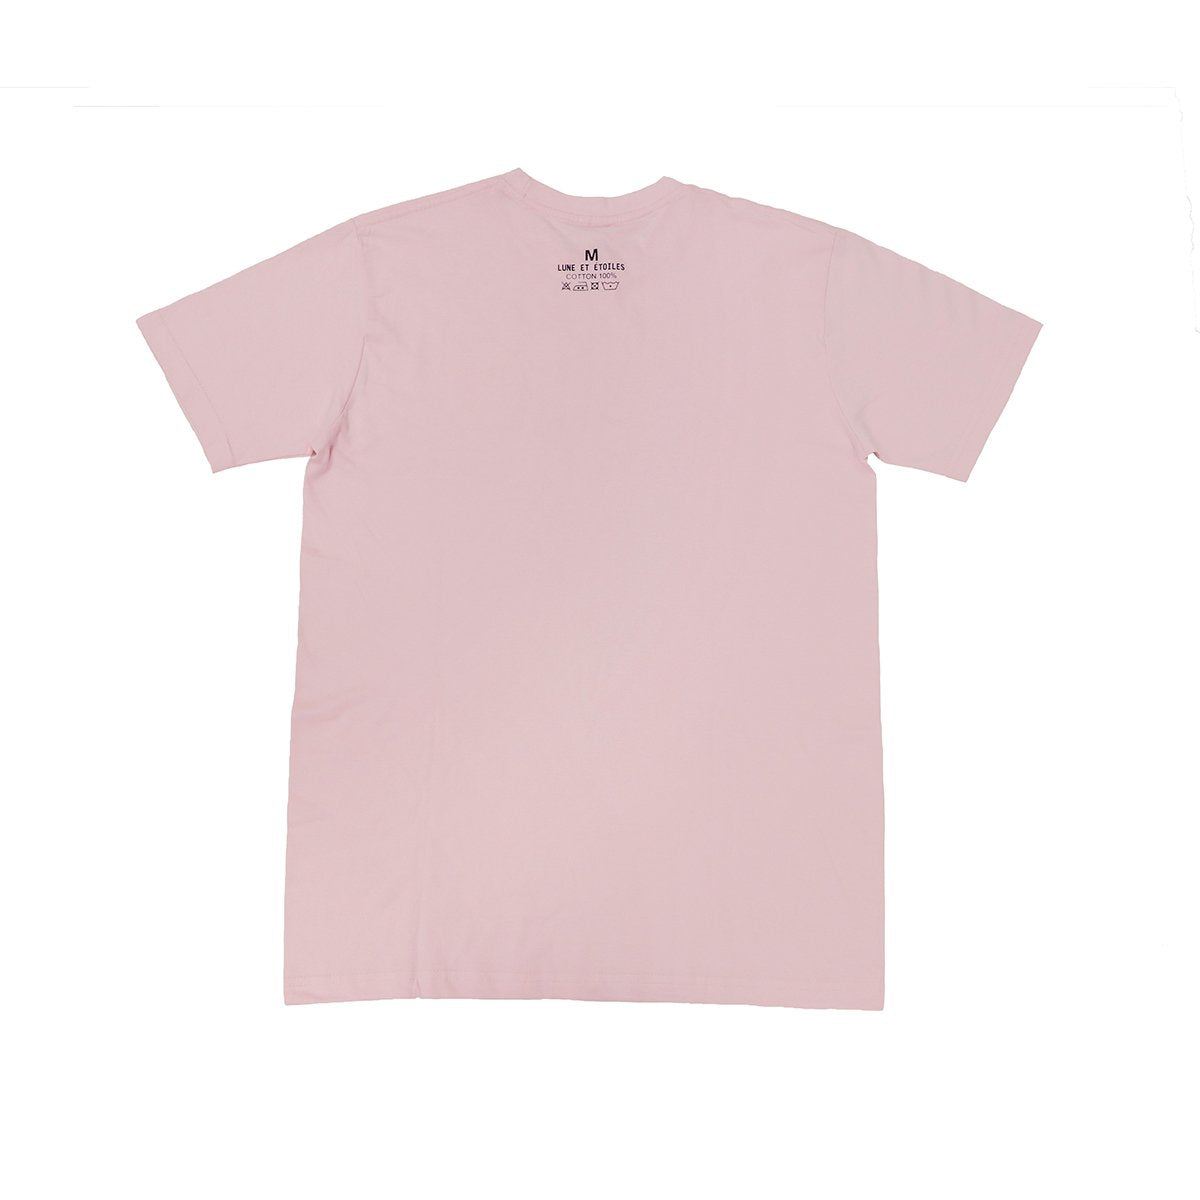 Smiling Face Tee (Pink) - Chainless Brain